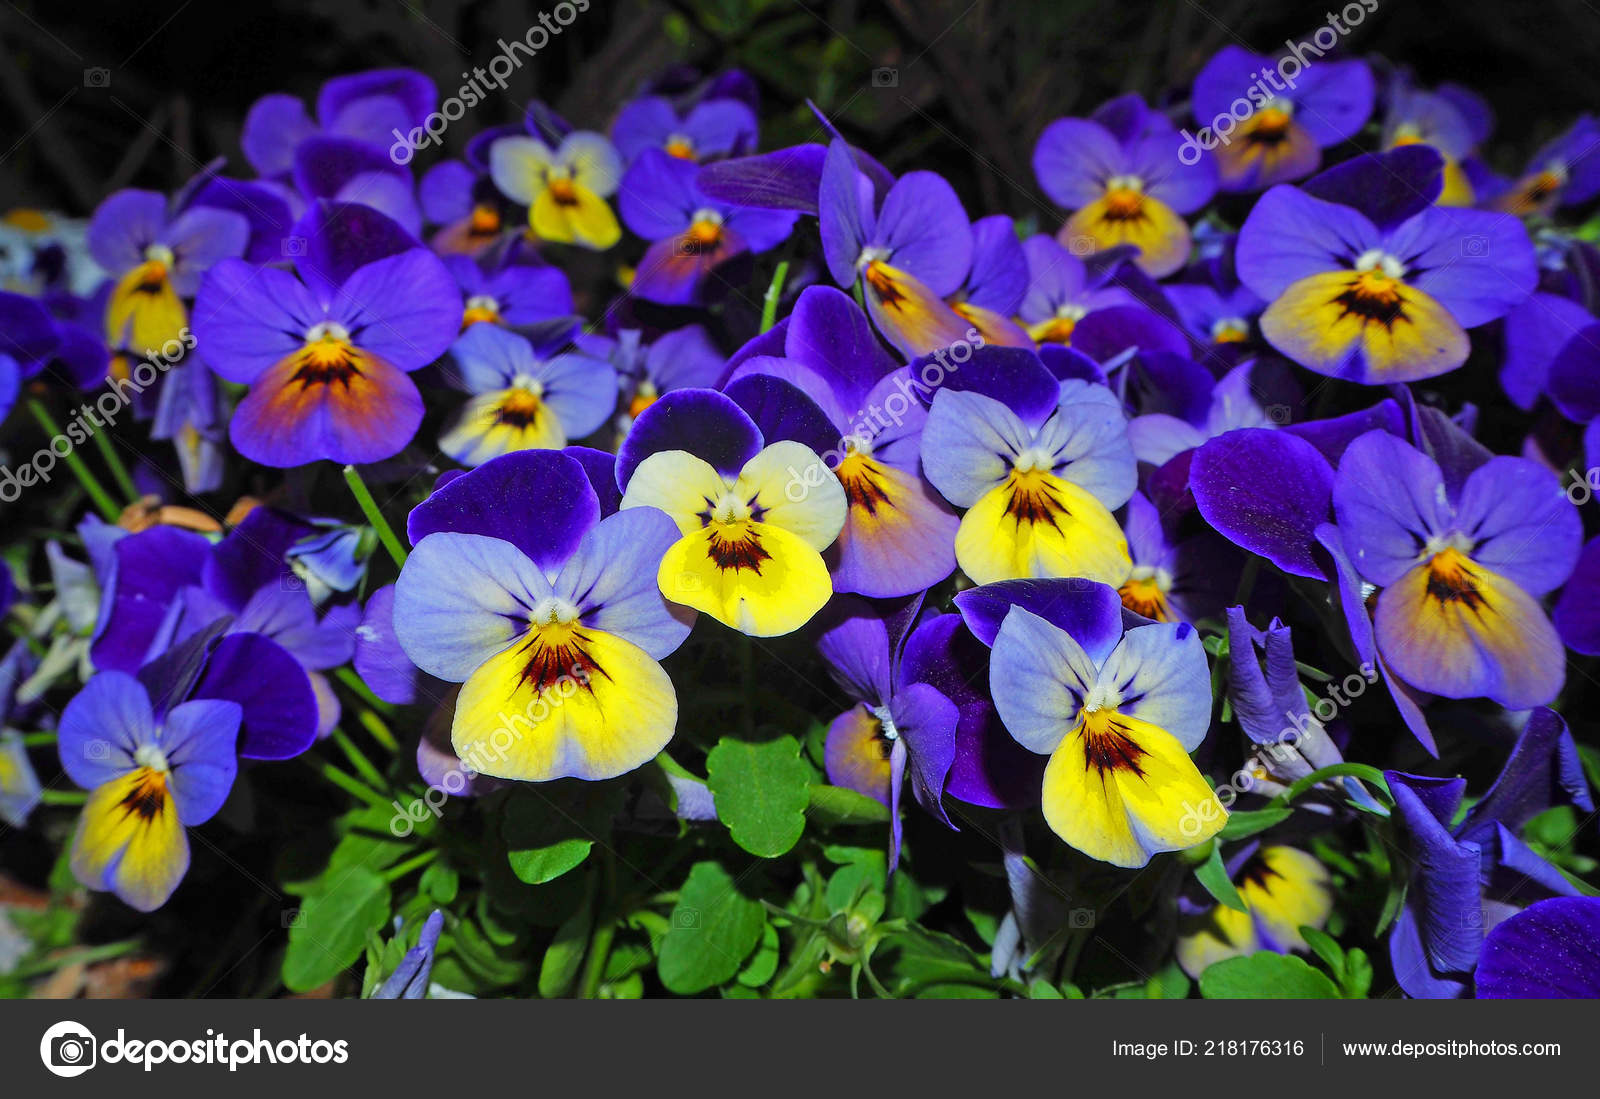 Pansy Flowers Vivid Yellow Blue Spring Colors Lush Green Background Stock Photo C Elens196 218176316